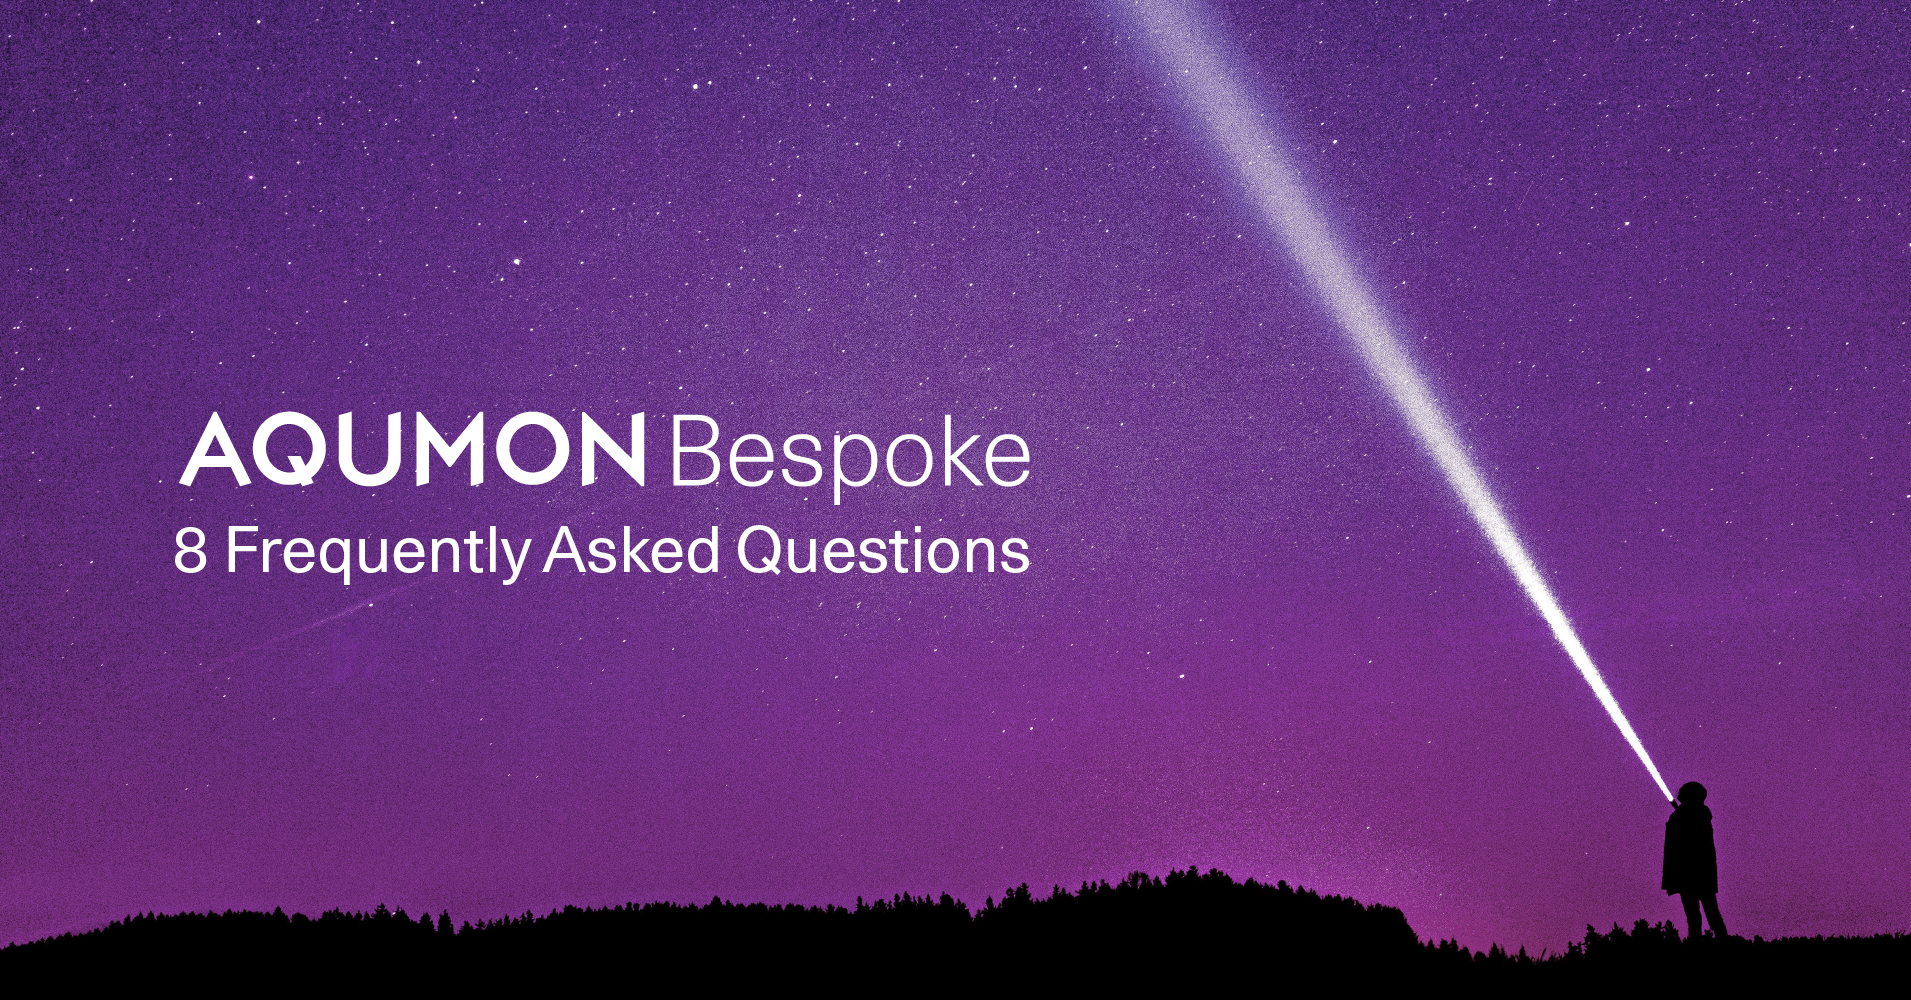 Top Questions Asked About AQUMON’s Bespoke Investment Services